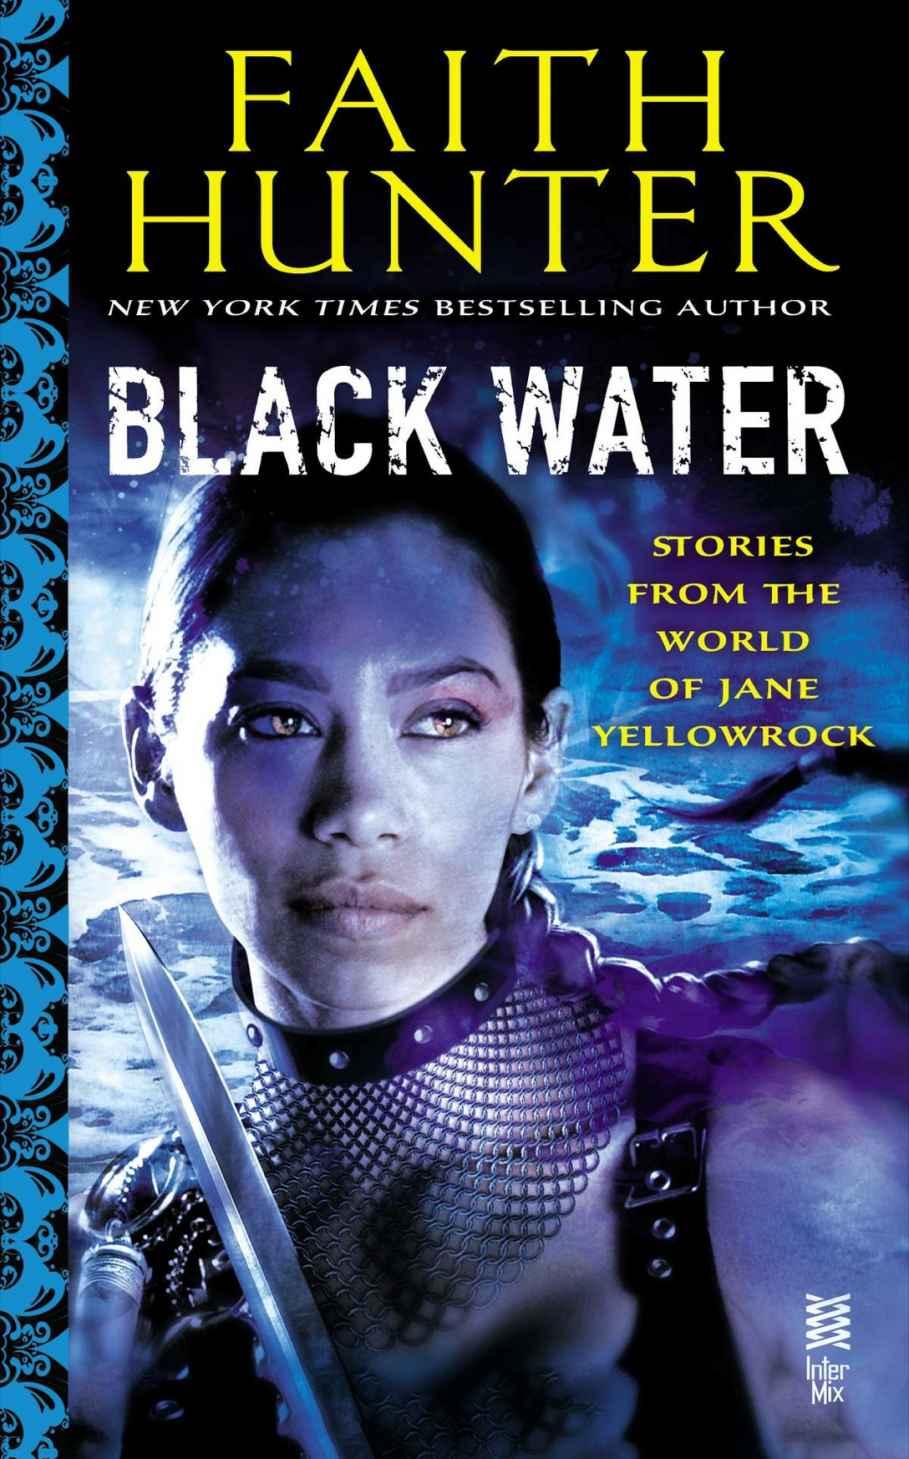 Black Water: A Jane Yellowrock Collection by Faith Hunter